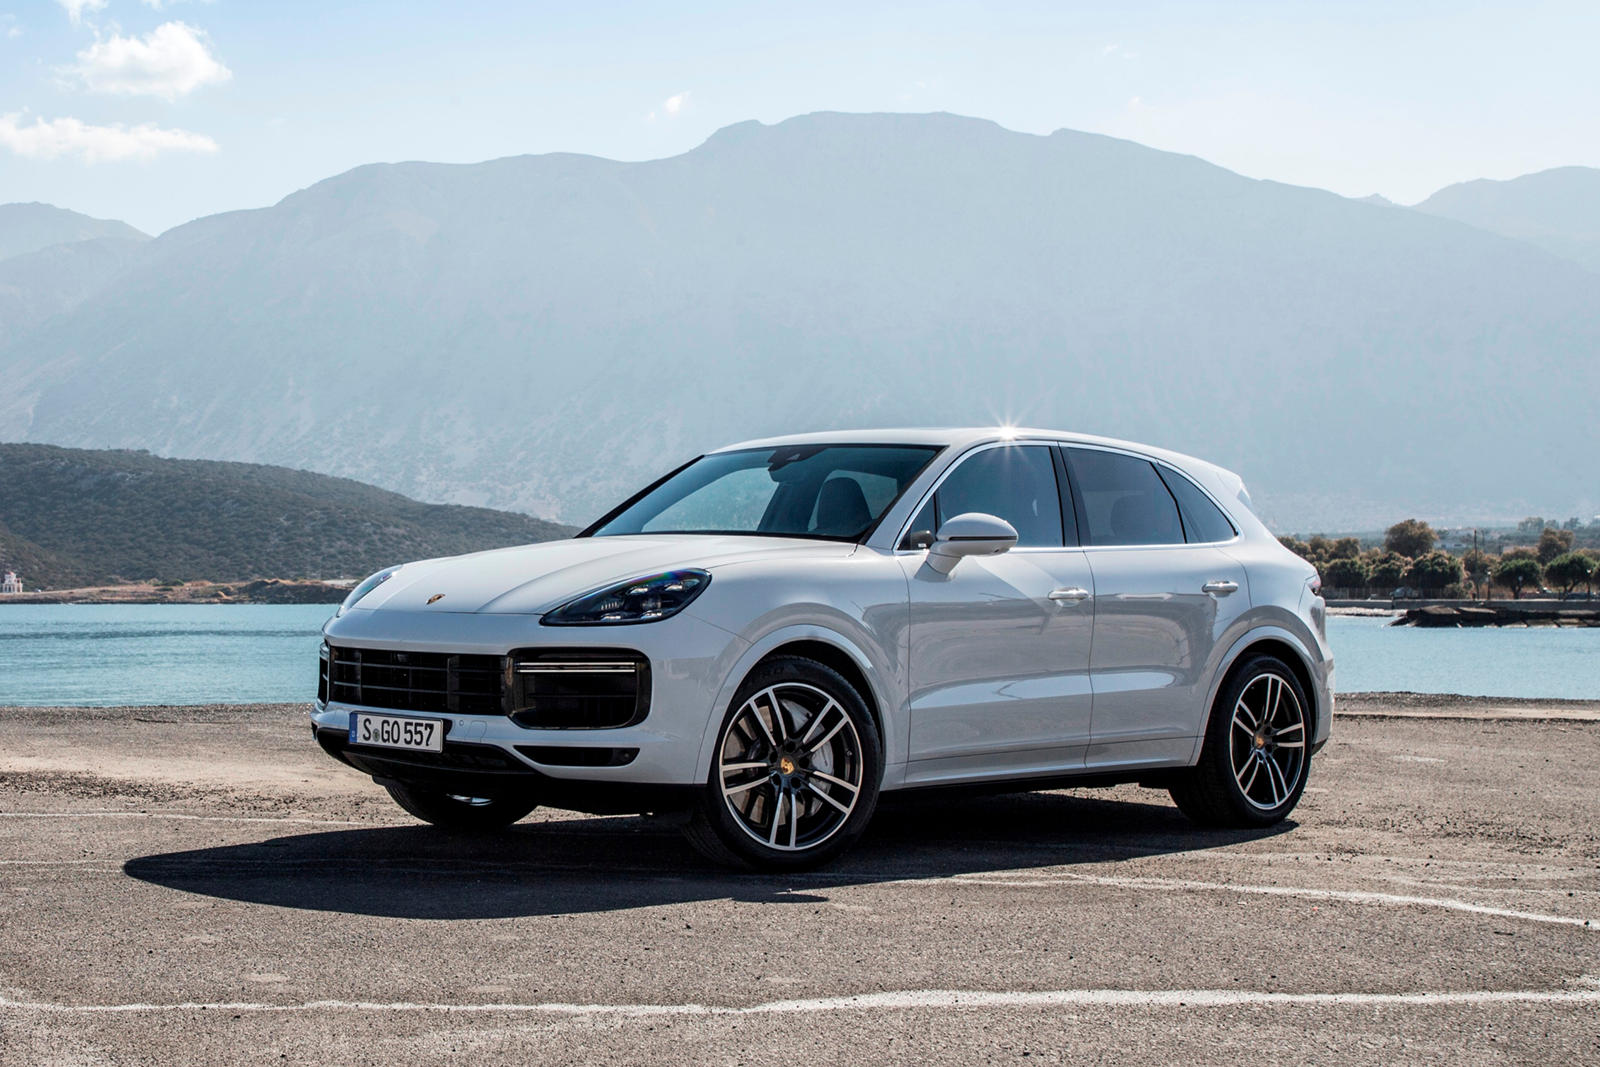 2019 Porsche Cayenne Turbo Front Angle View